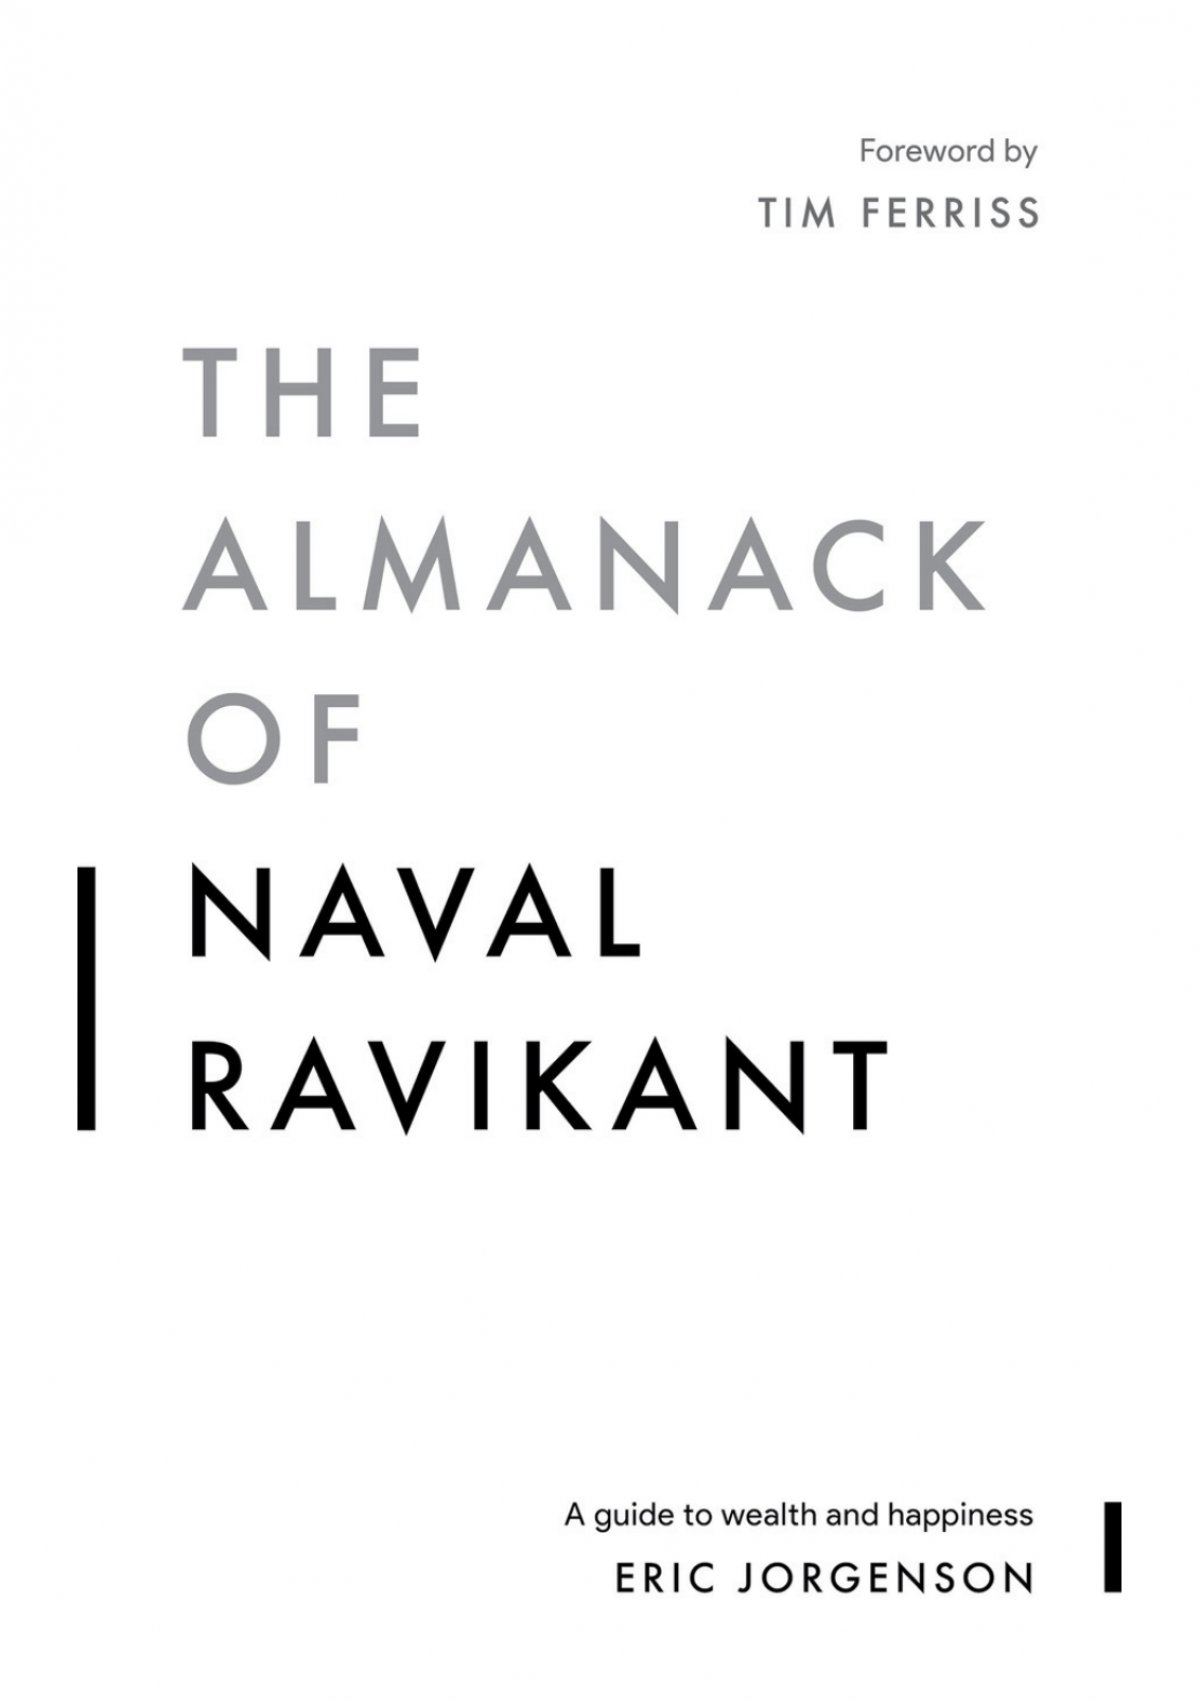 THE ALMANACK OF NAVAL RAVIKANT : Eric Jorgenson : Free Download, Borrow,  and Streaming : Internet Archive